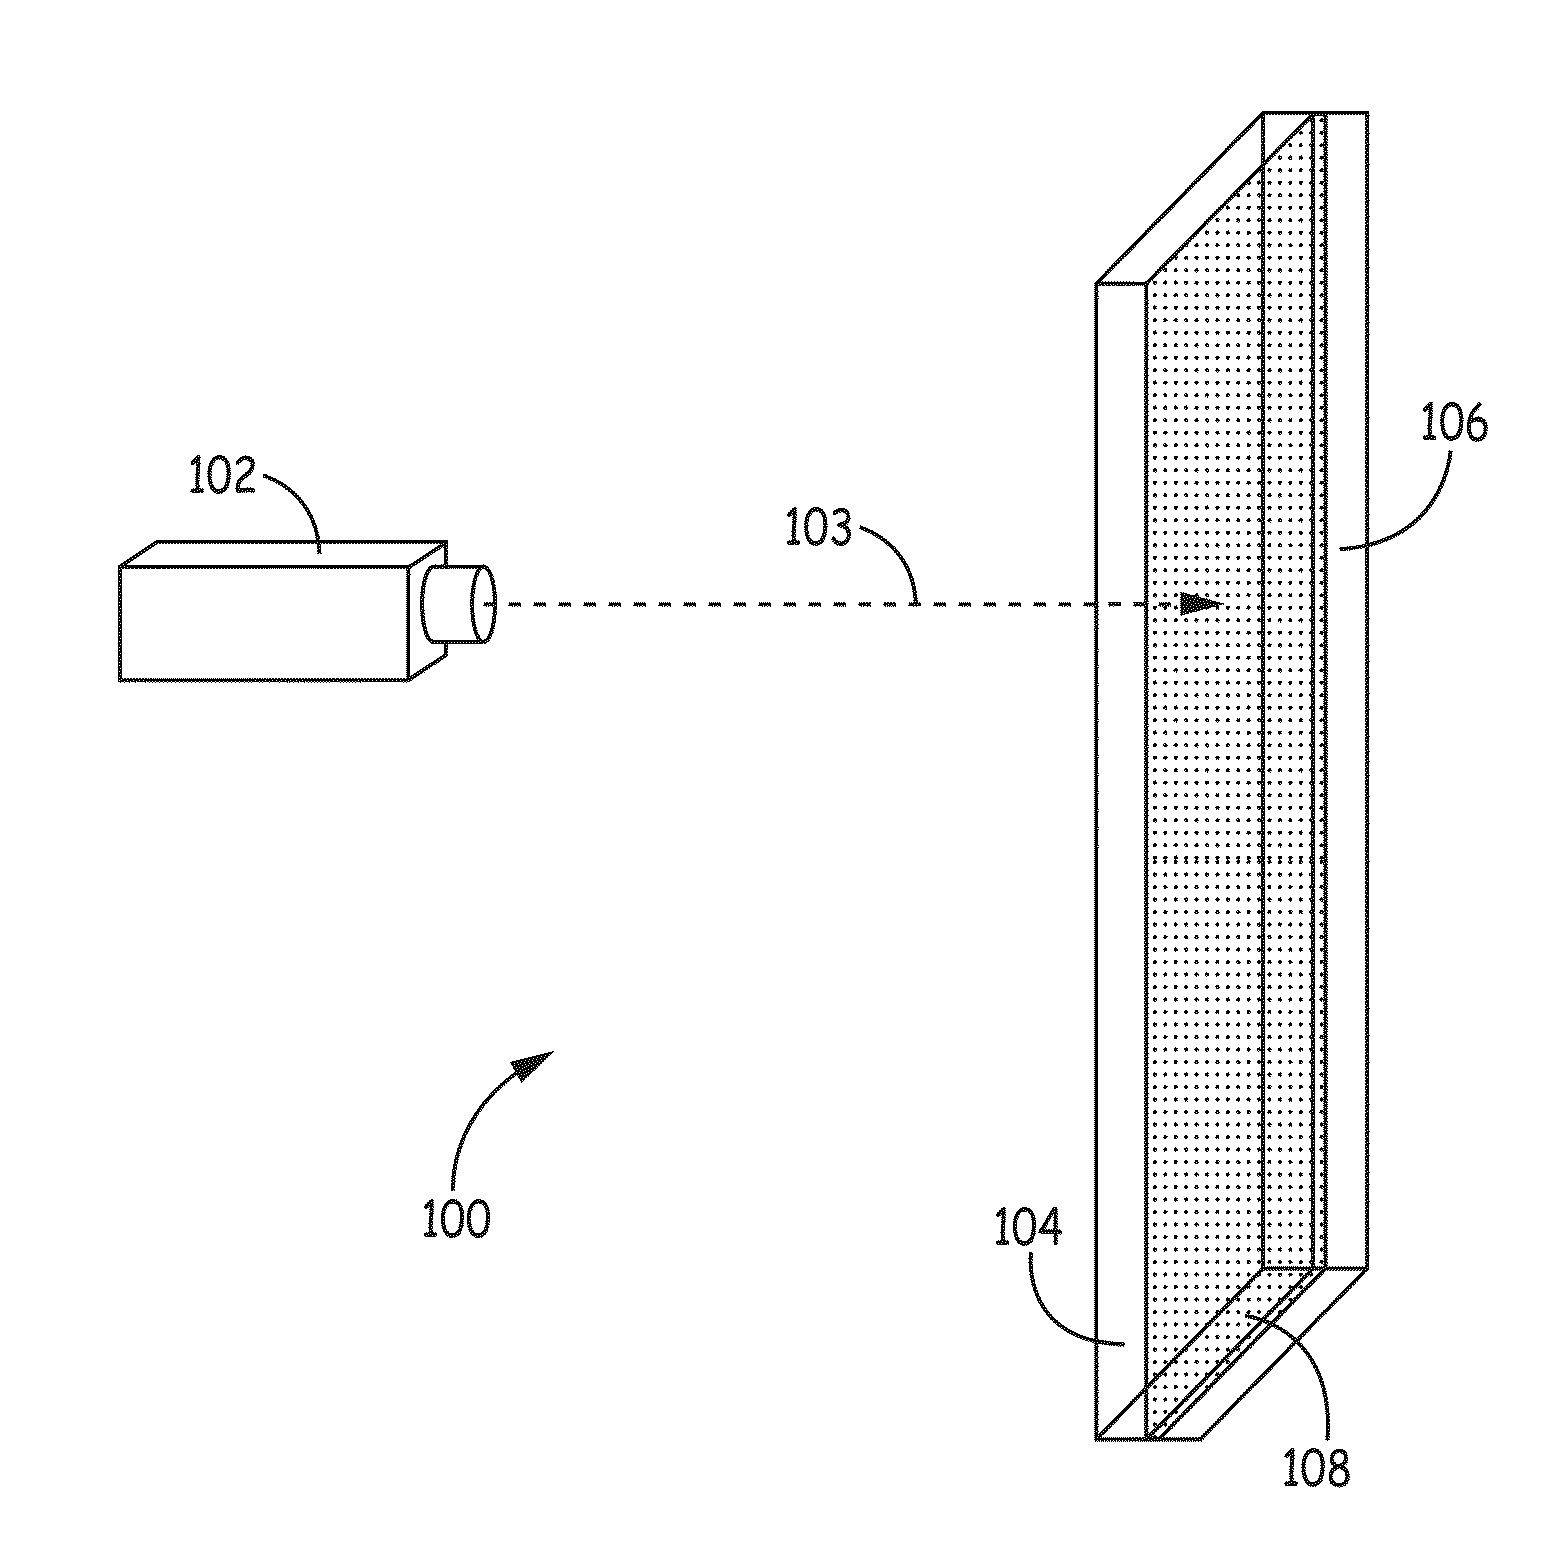 Kinetically limited nano-scale diffusion bond structures and methods